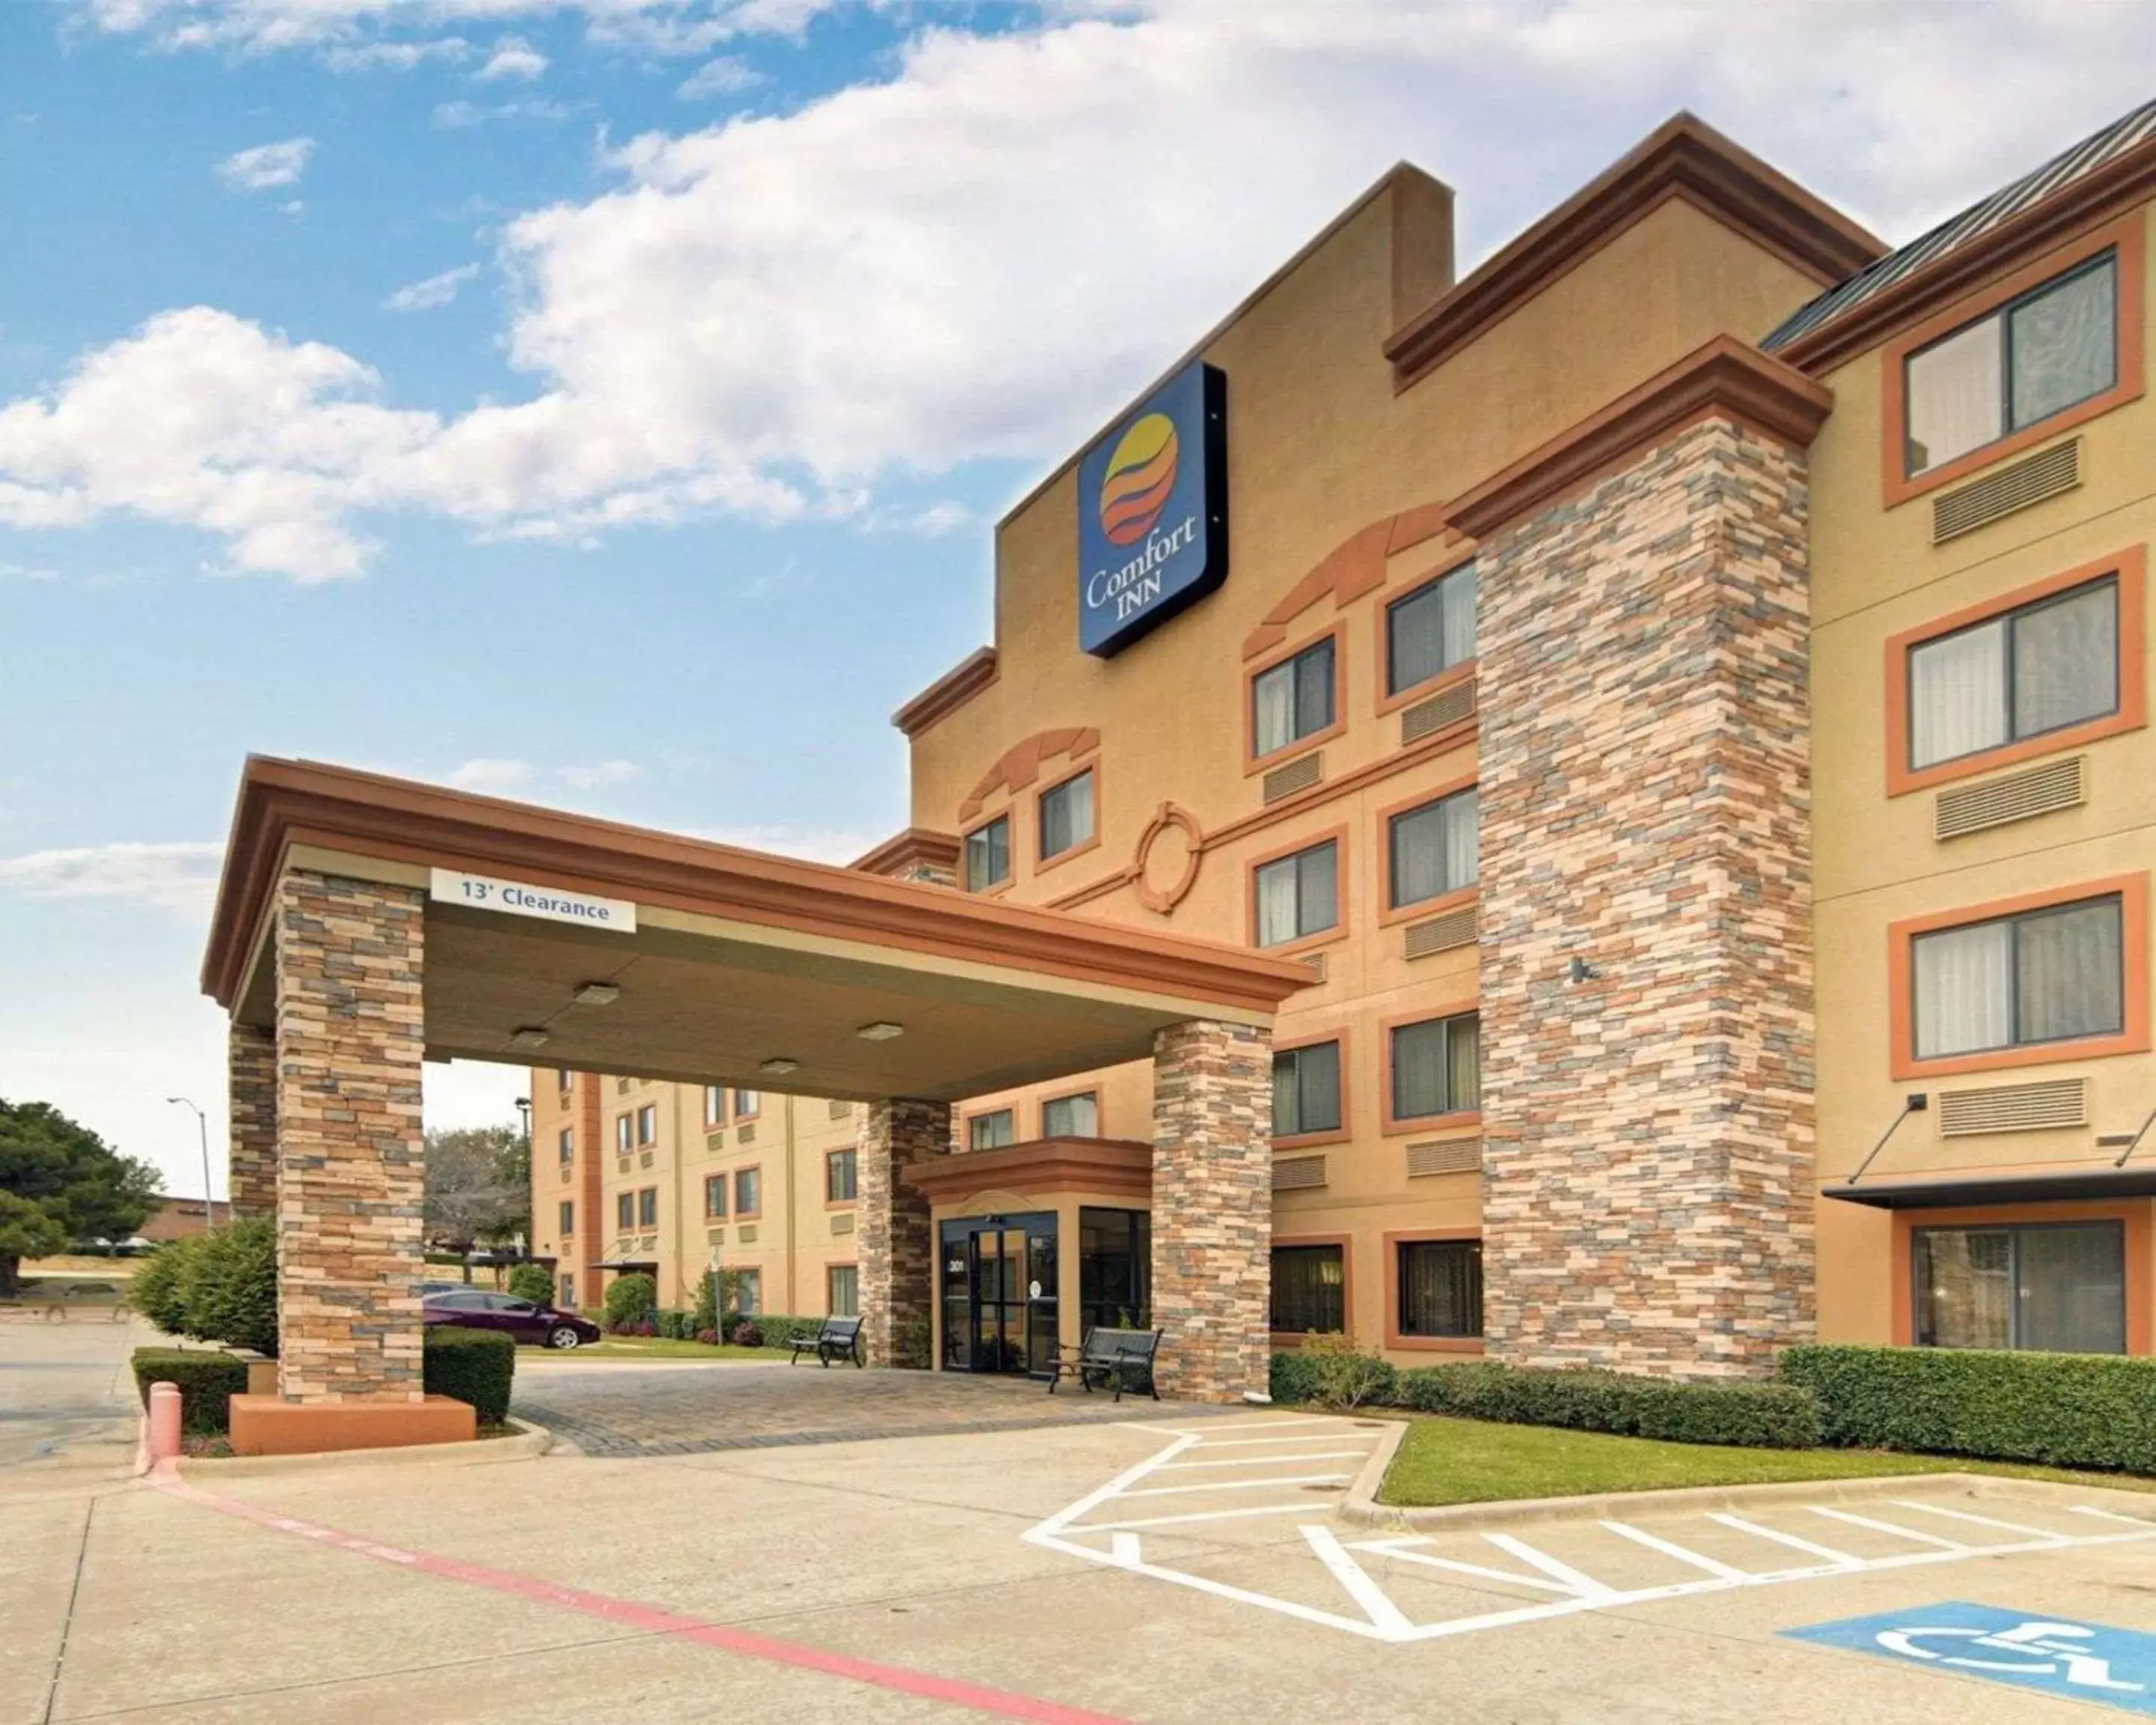 Property Building in Comfort Inn Grapevine Near DFW Airport